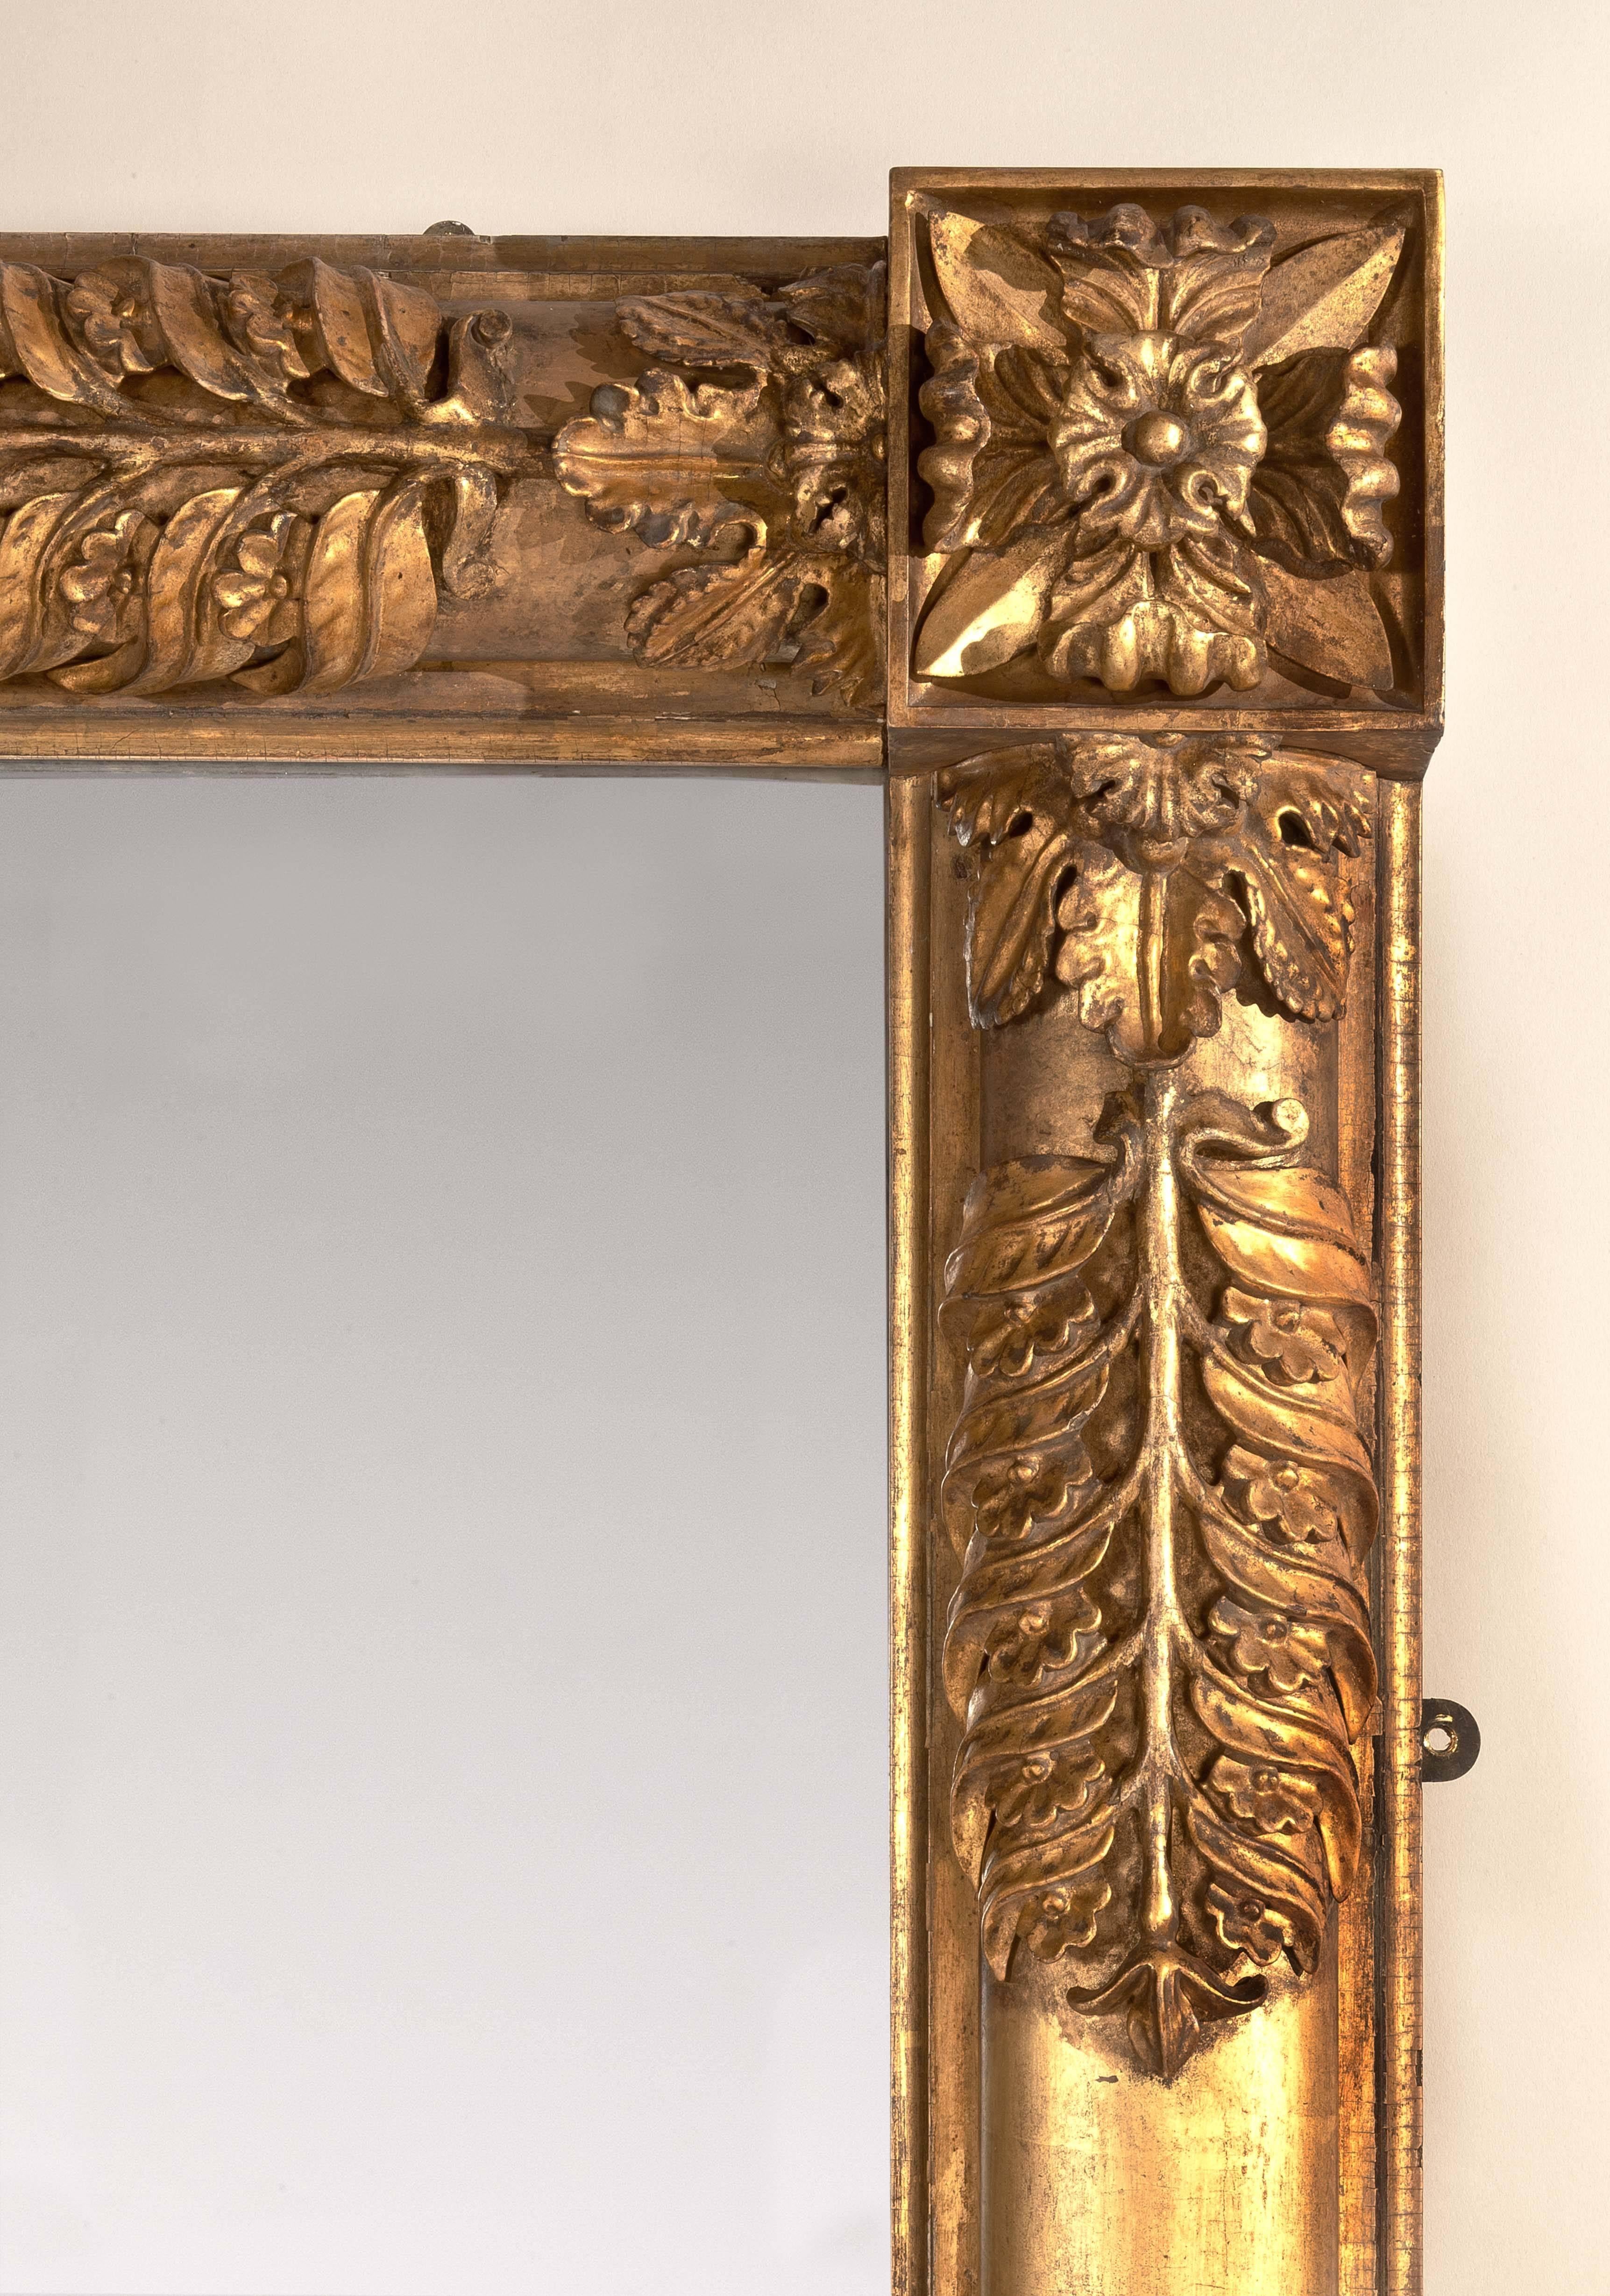 IMPORTANT CLASSICAL GILTWOOD OVERMANTLE MIRROR
WITH CARVED PALM FROND DECORATION
Attributed to John Doggett (1780-1857)
Boston, c.1835

The rectangular mirror frame with carved rosettes in each corner with engaged oval pilasters encrusted with